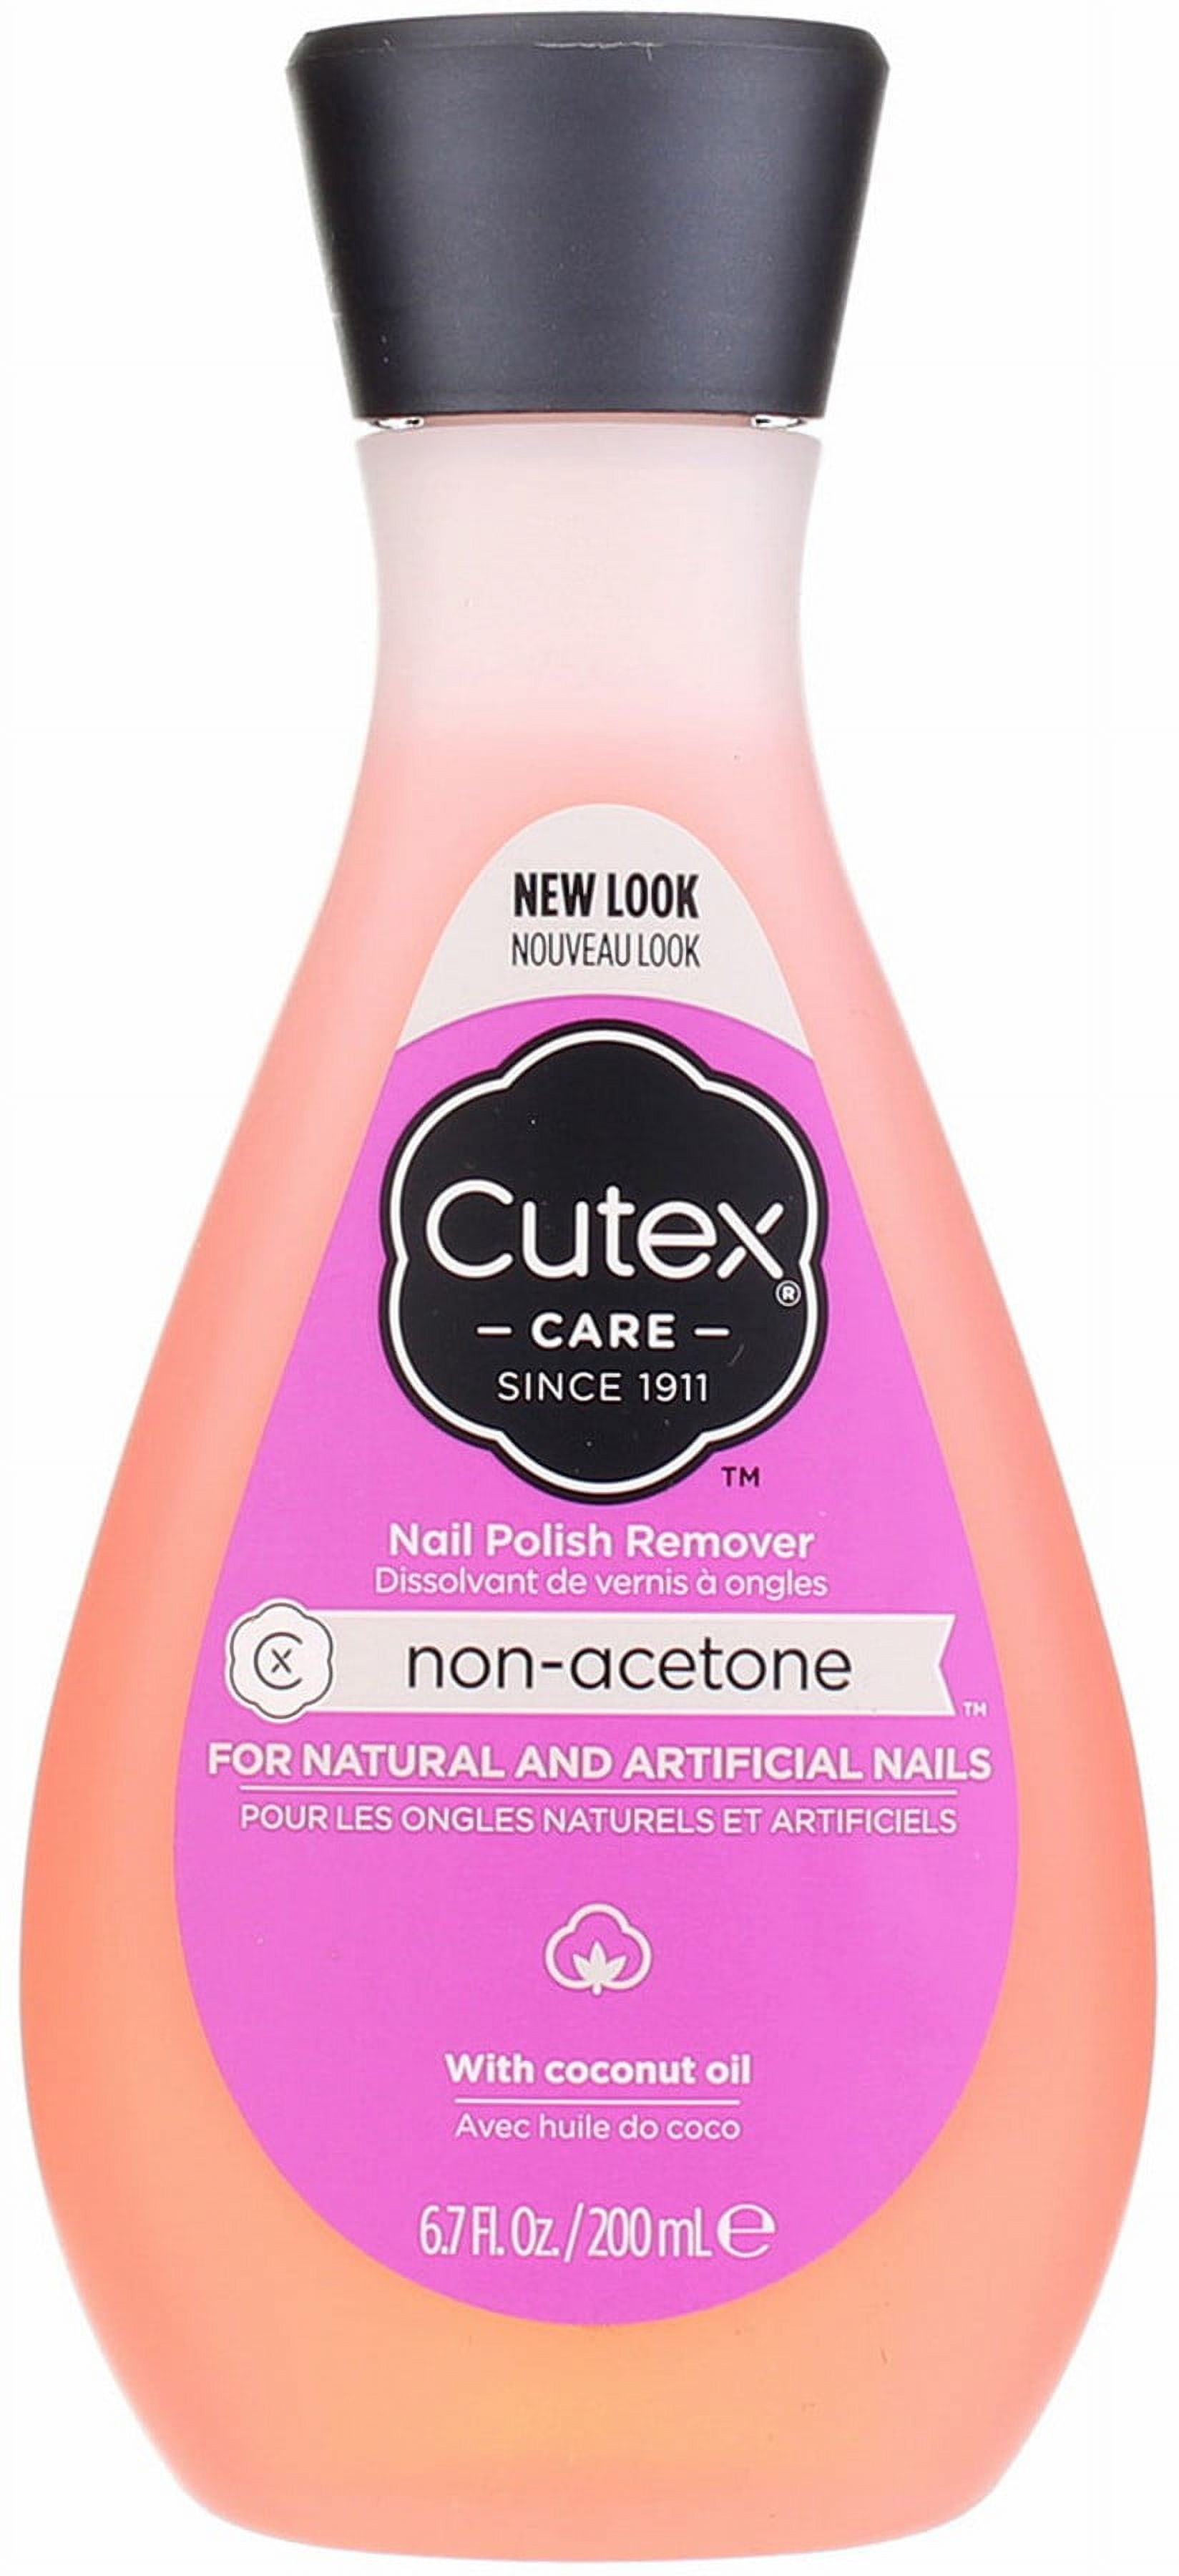 Cutex One-Step Pads Non-Acetone Nail Polish Remover - 10 CT | Skin Care |  D'Agostino